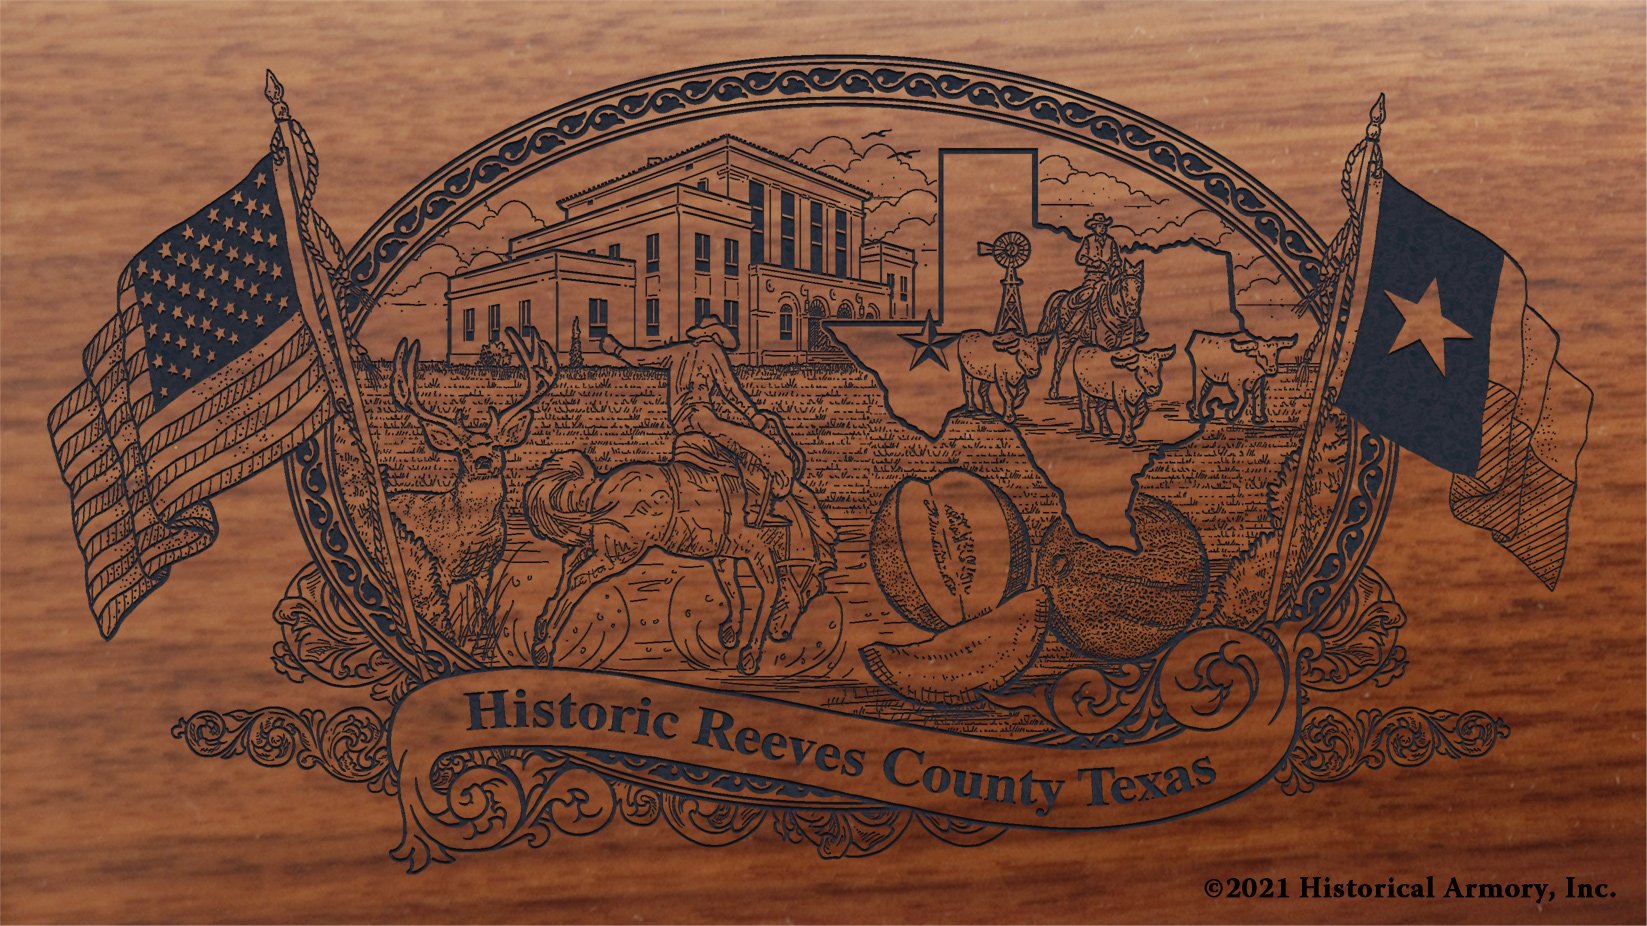 Engraved artwork | History of Reeves County Texas | Historical Armory